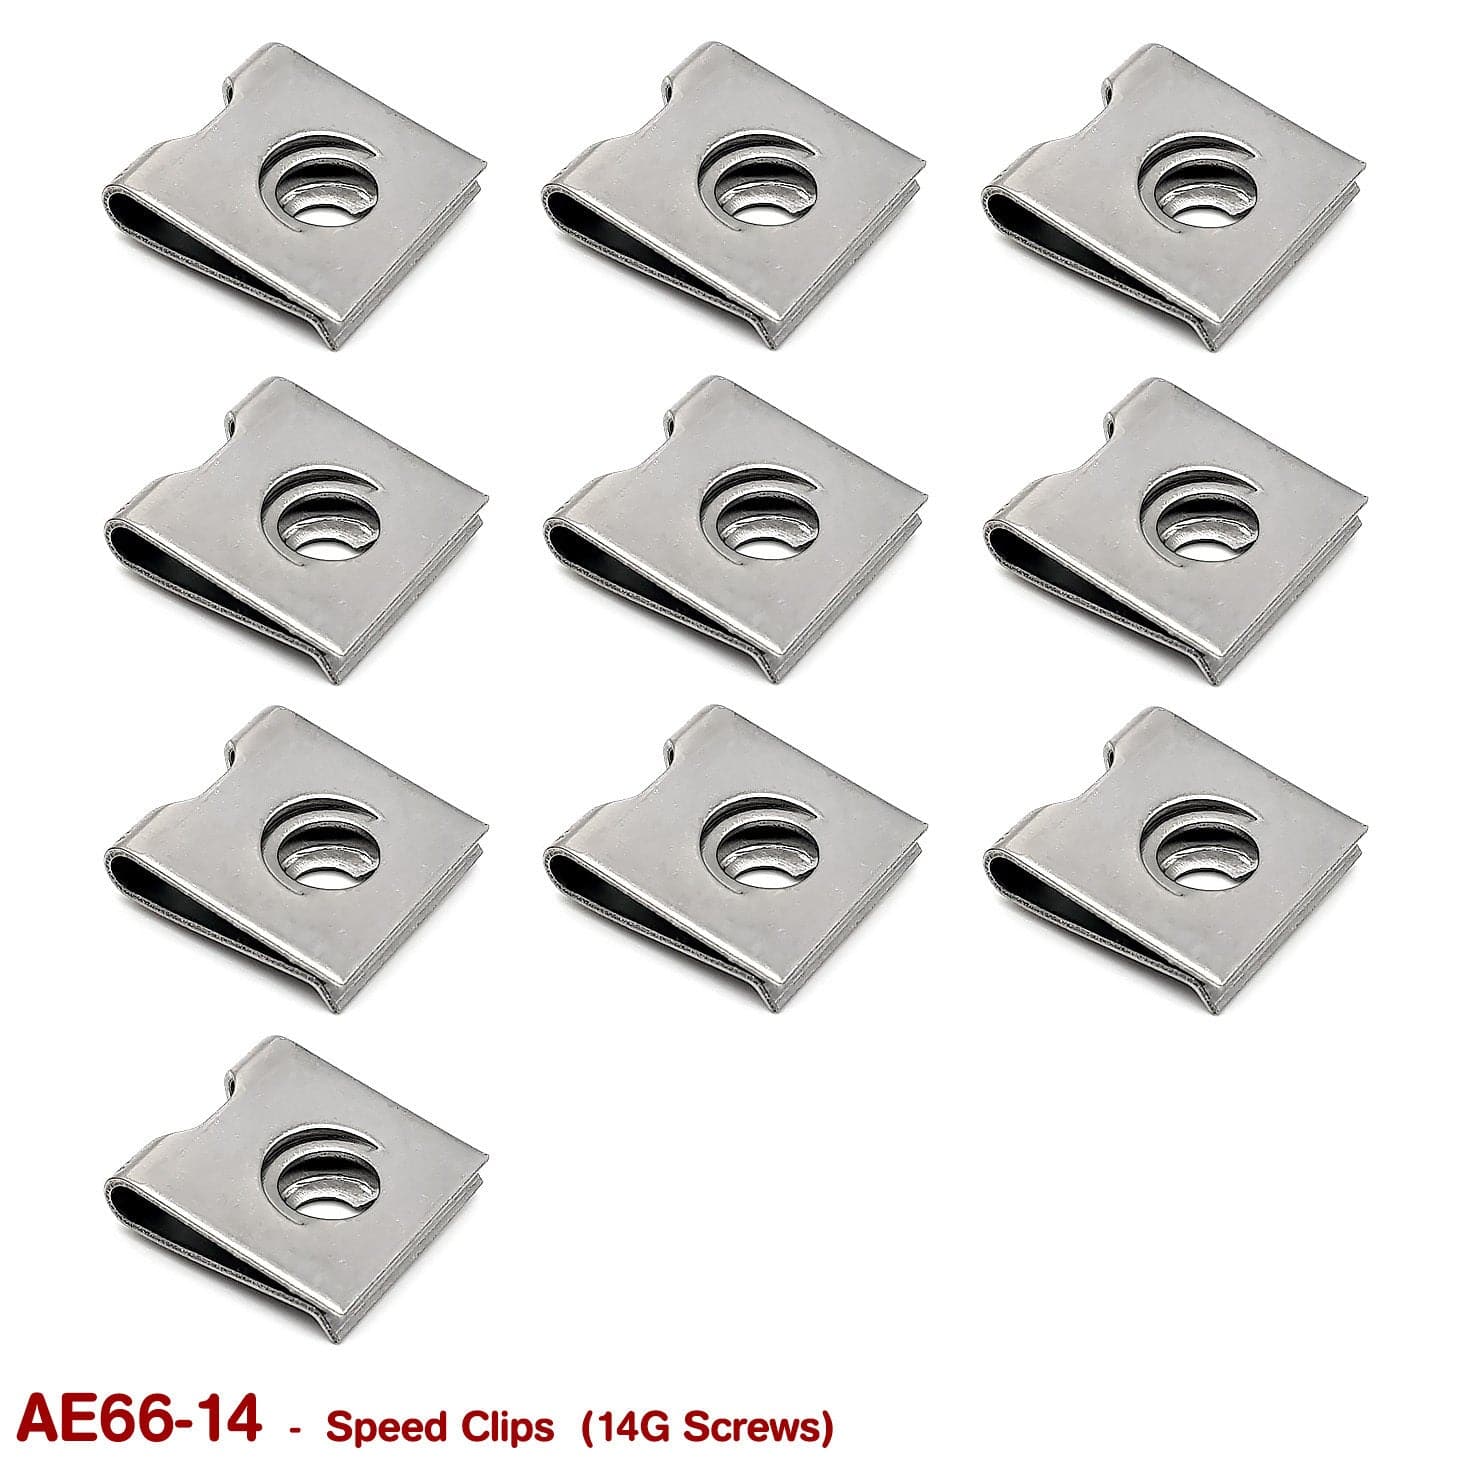 SCREW SPEED CLIPS - 14G  (STAINLESS STEEL)